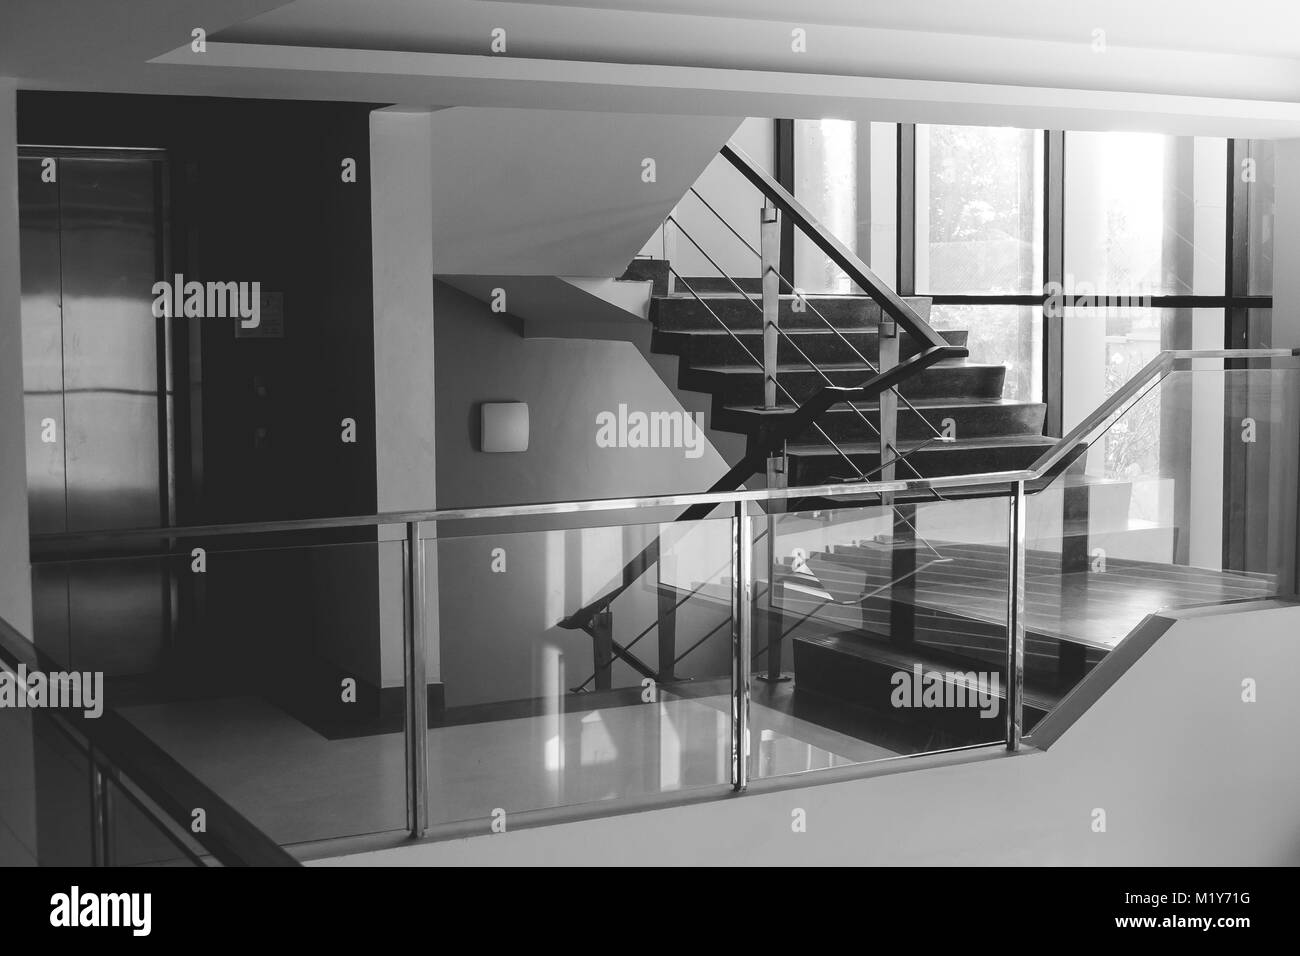 Abstract black and white image of architecture interior design modern building. Stock Photo